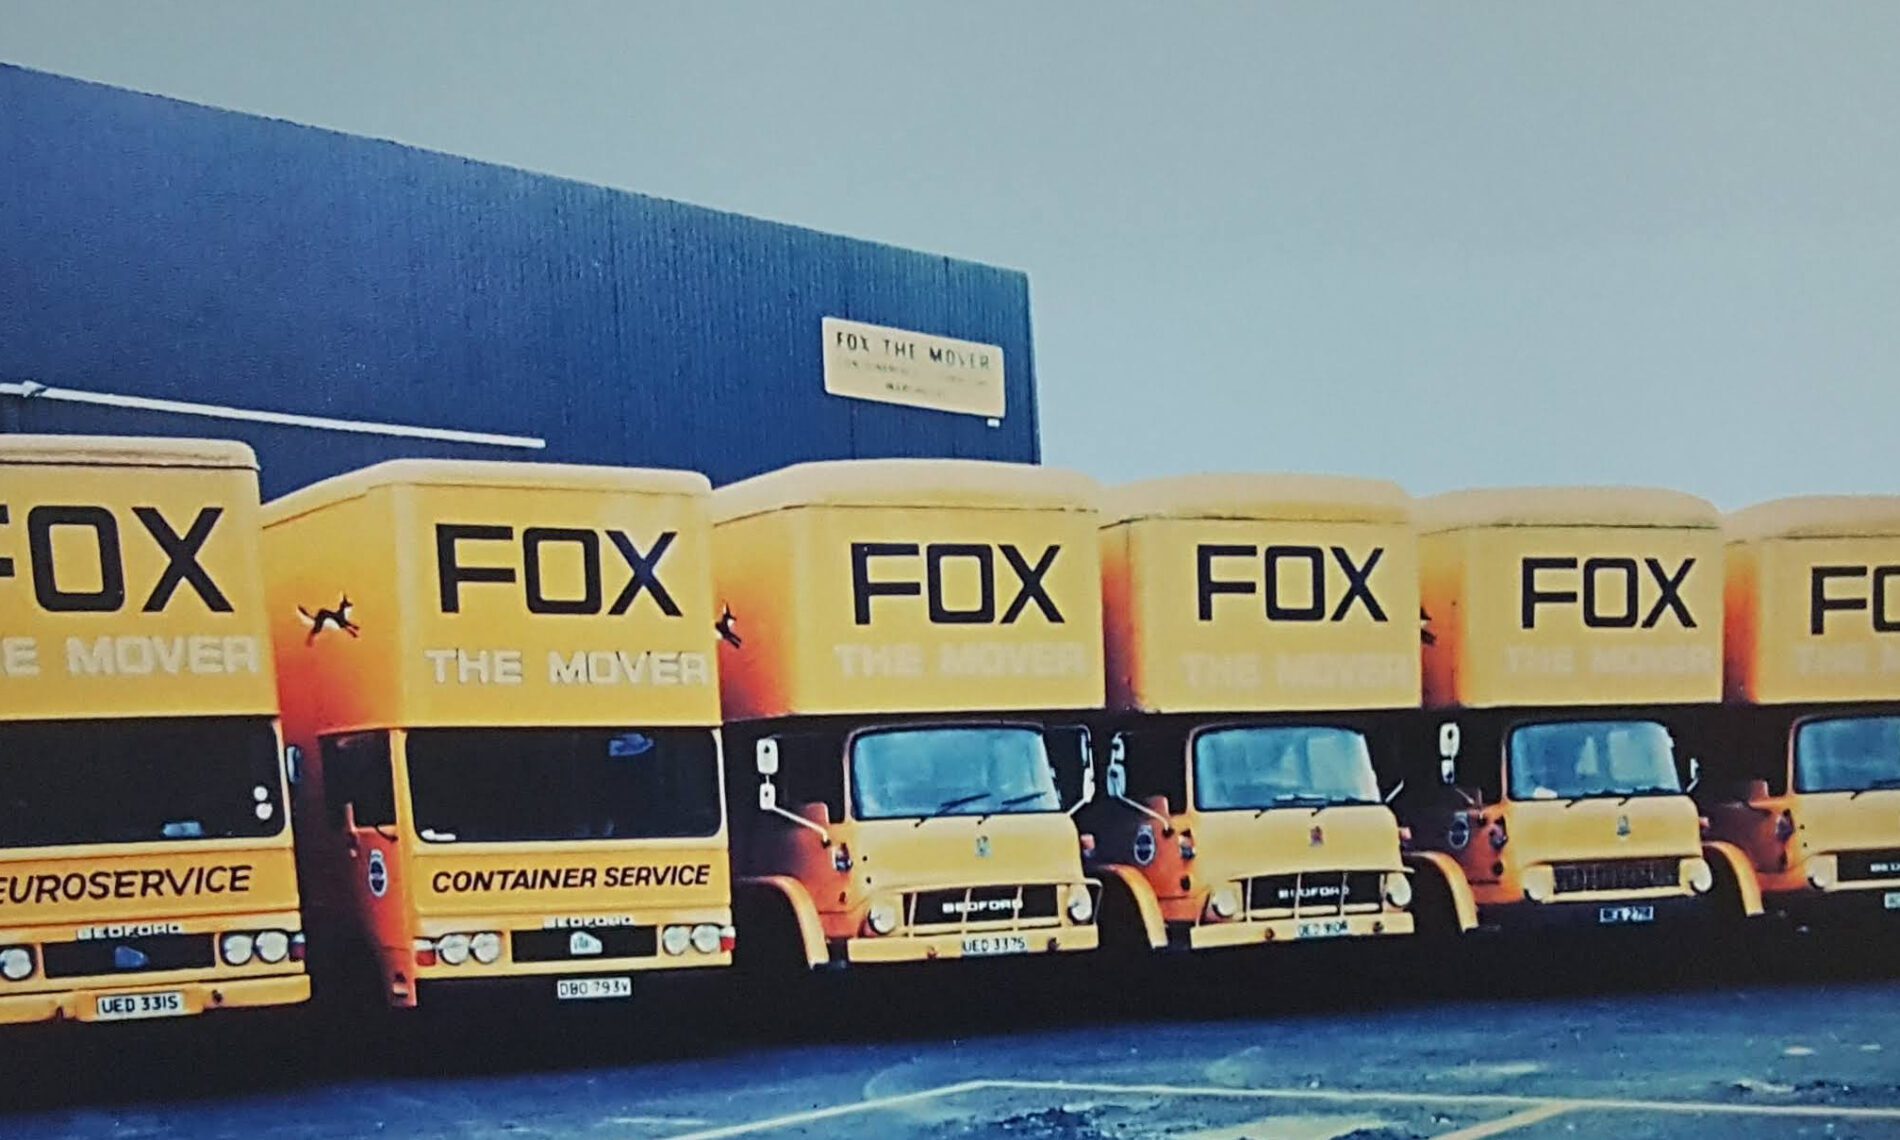 historic fox the mover vans outside a fox facility